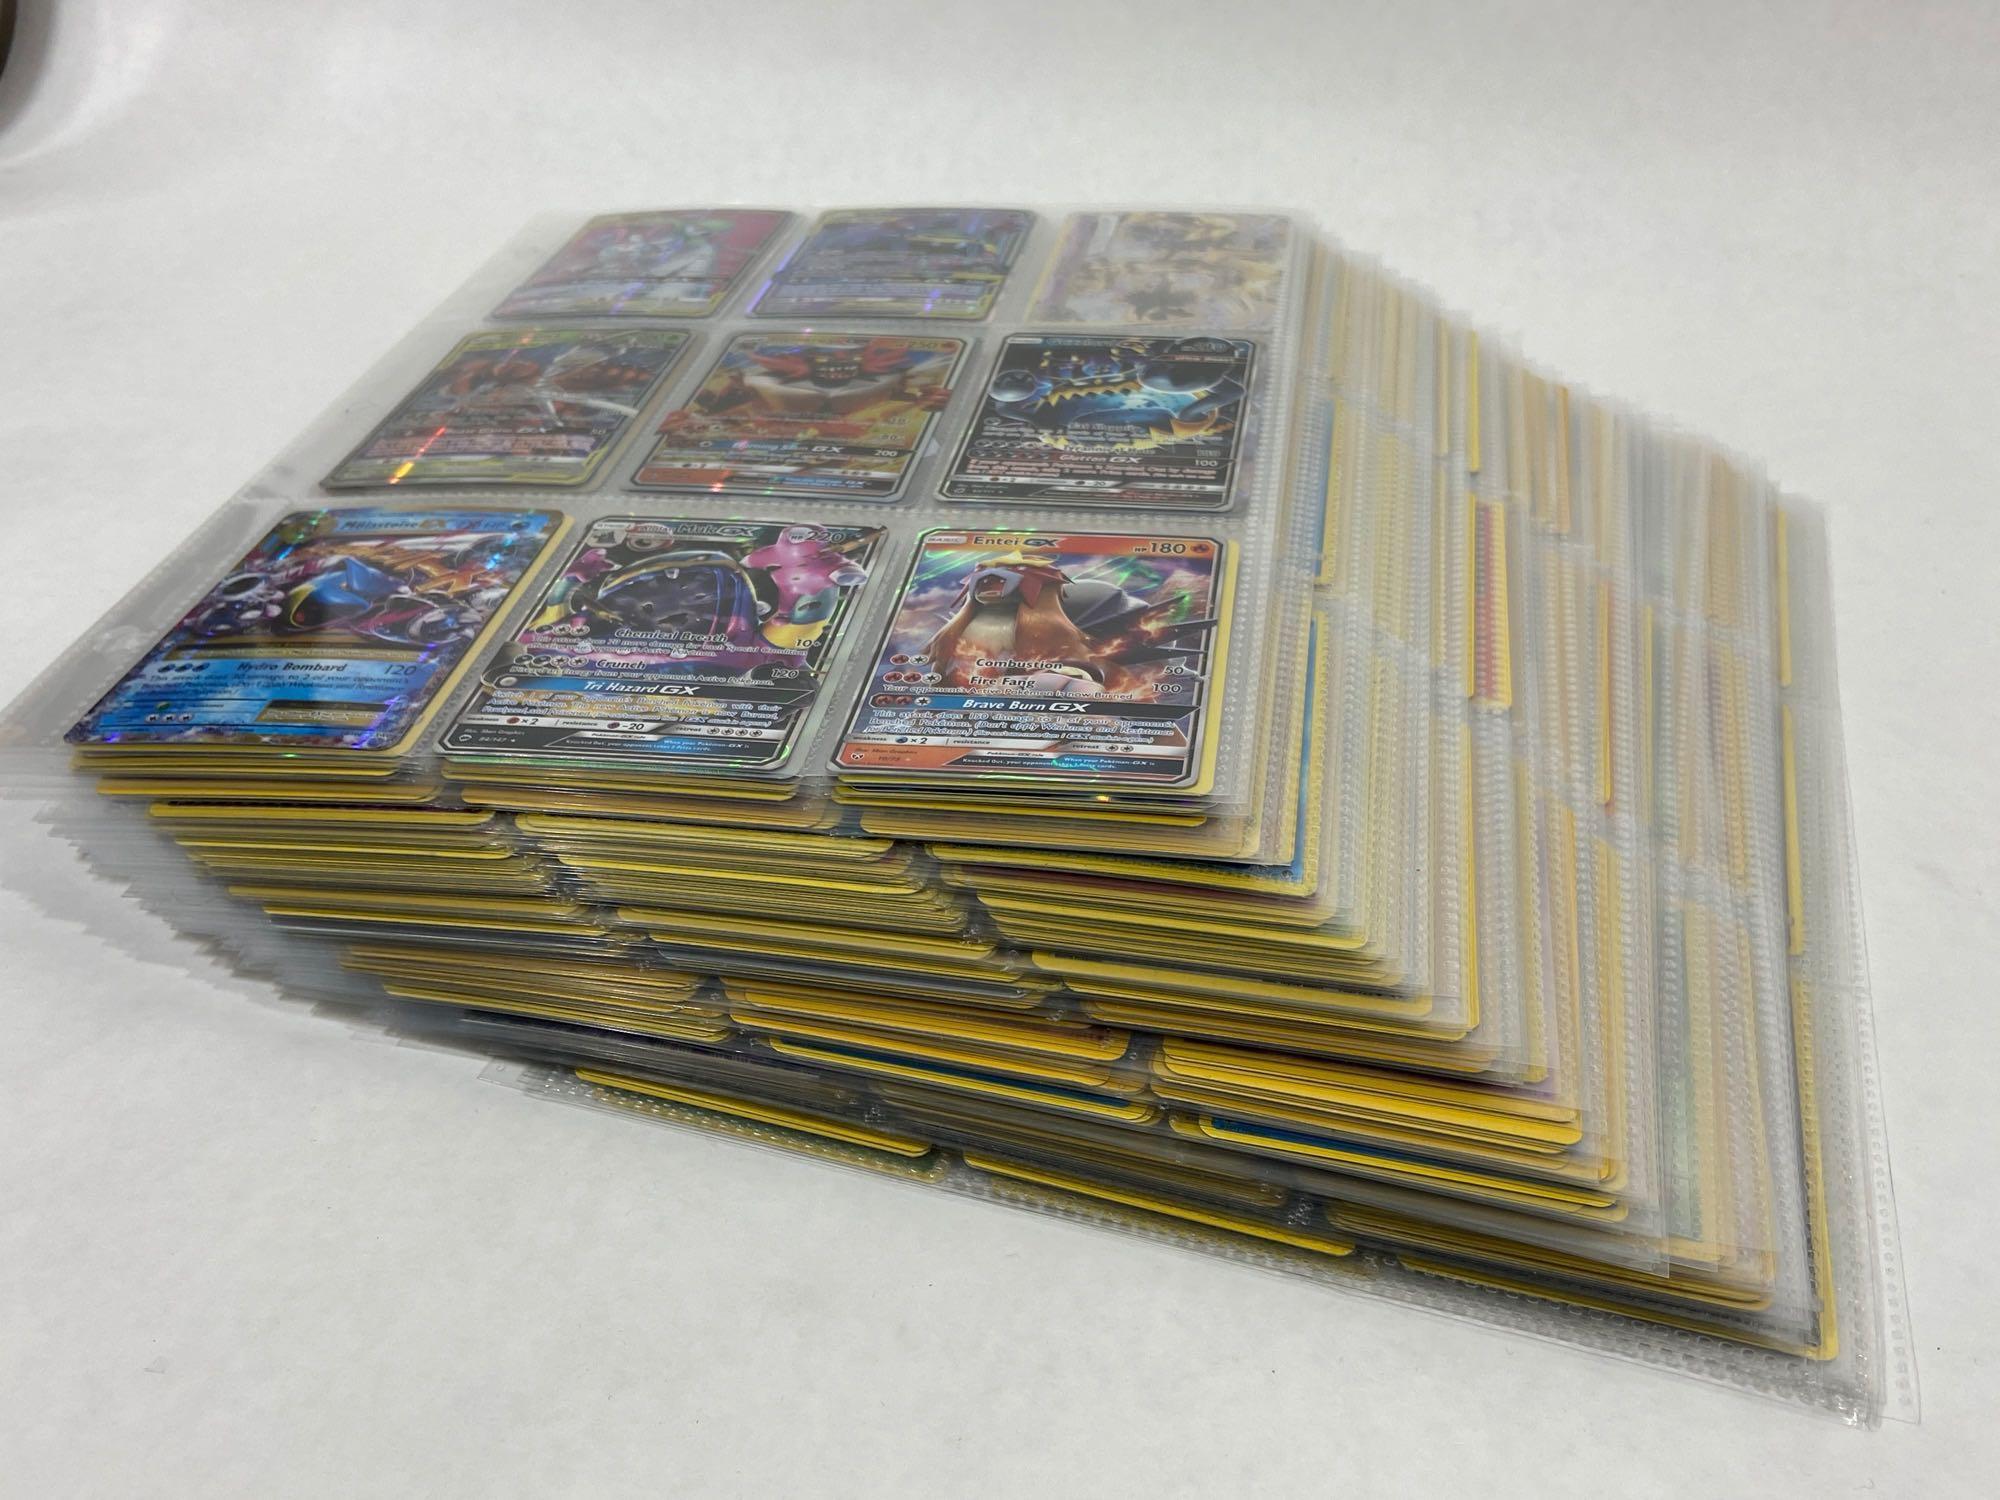 550+ Pokemon Trading Cards, many are Break, EX, GX, Holographic Foil, etc